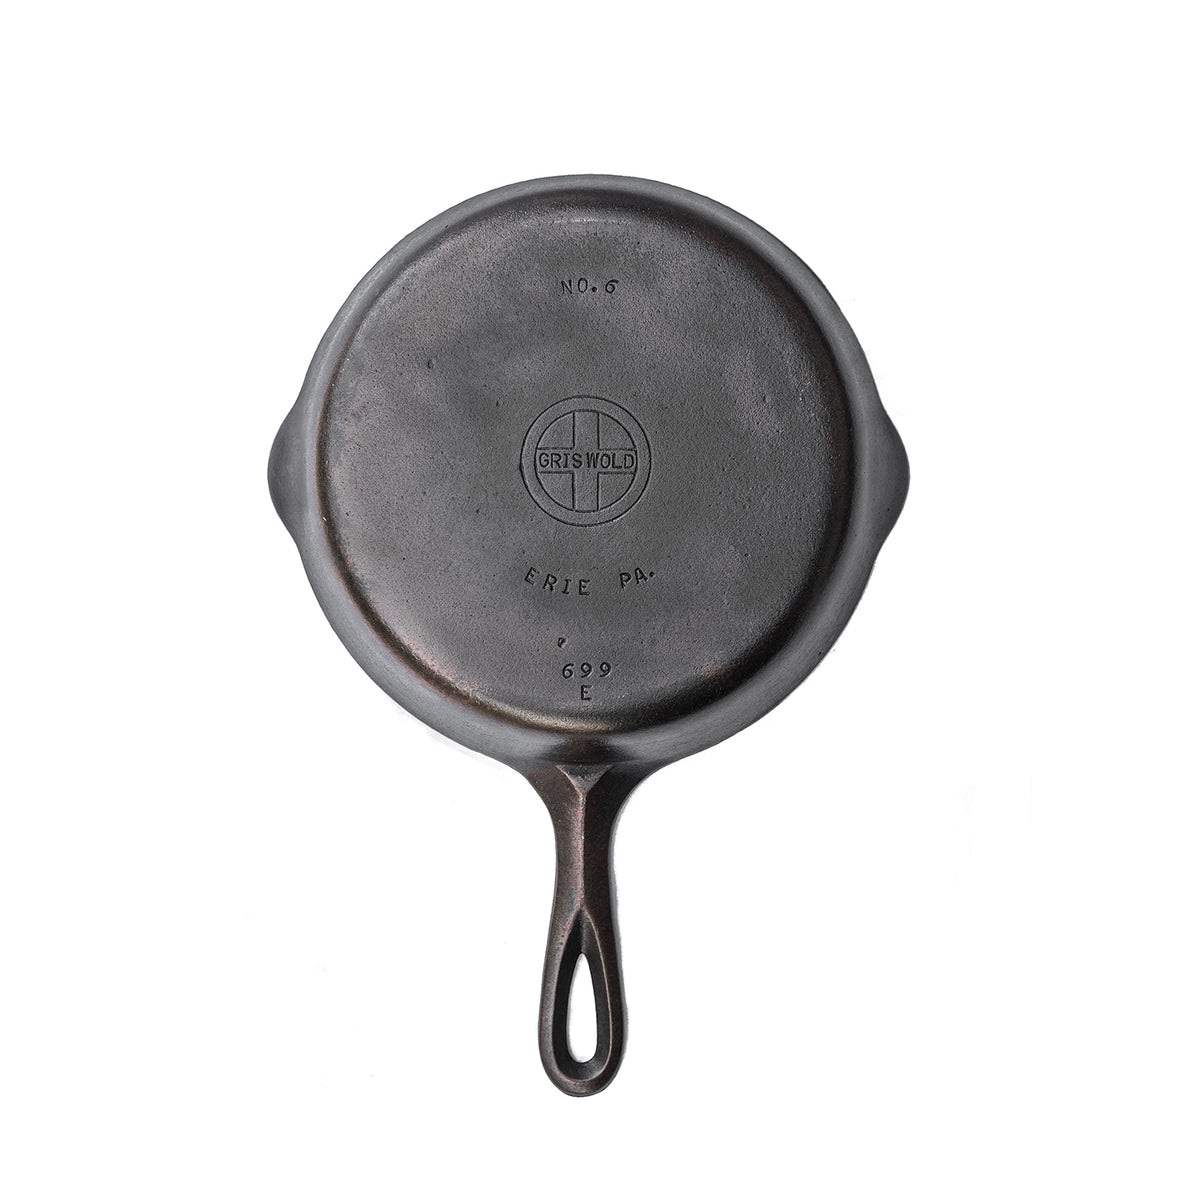 Vintage Griswold Cast Iron Skillet Frying Pan Small Block Logo Erie PA NO 6  With Double Pour Spouts Griswold Iron Spoon Iron Pan 6 699 M 